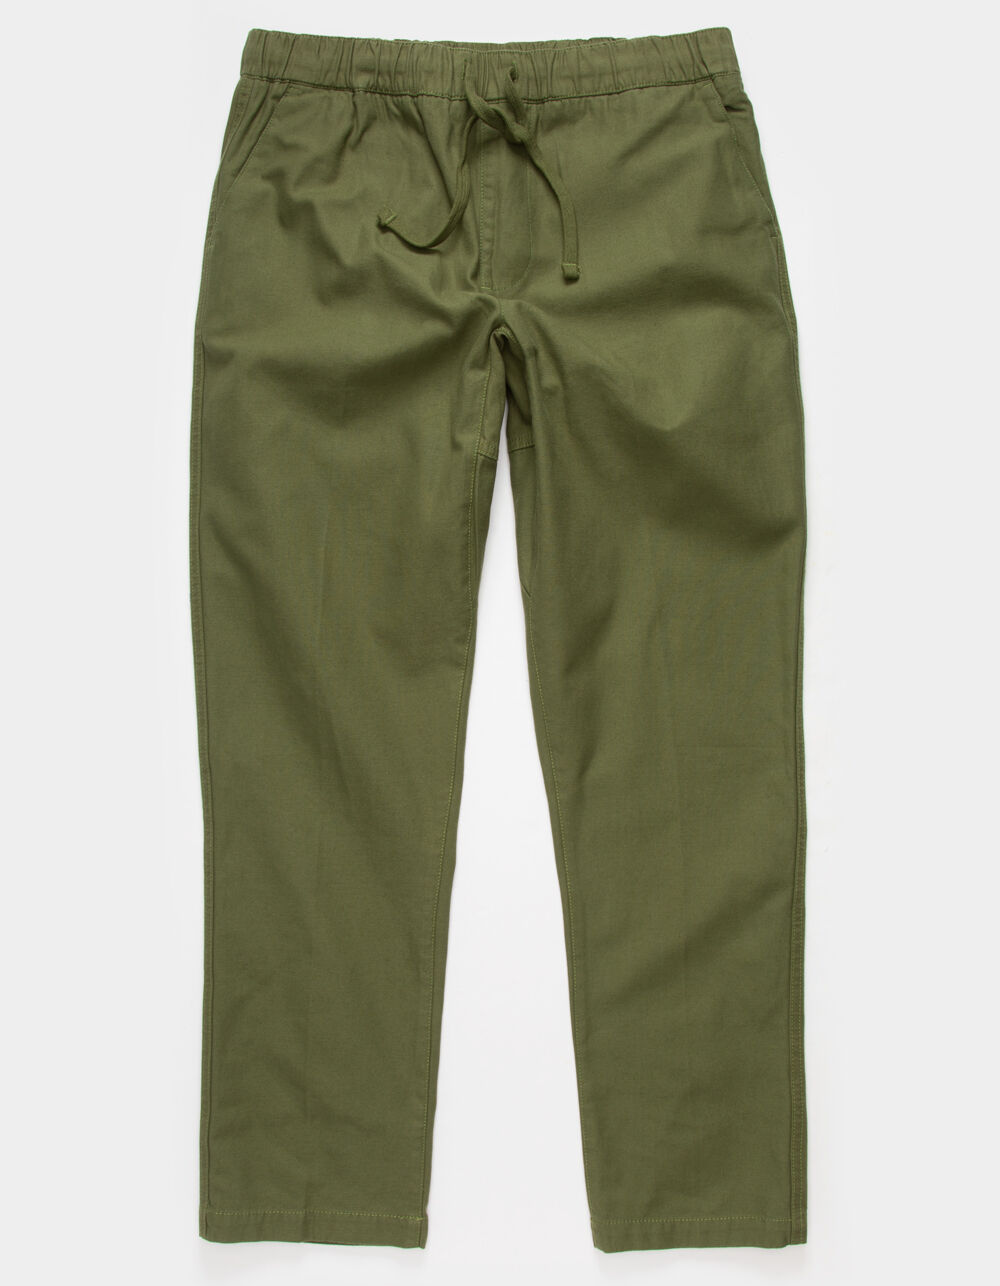 OBEY Ideals Organic Traveler Mens Pants - ARMY | Tillys